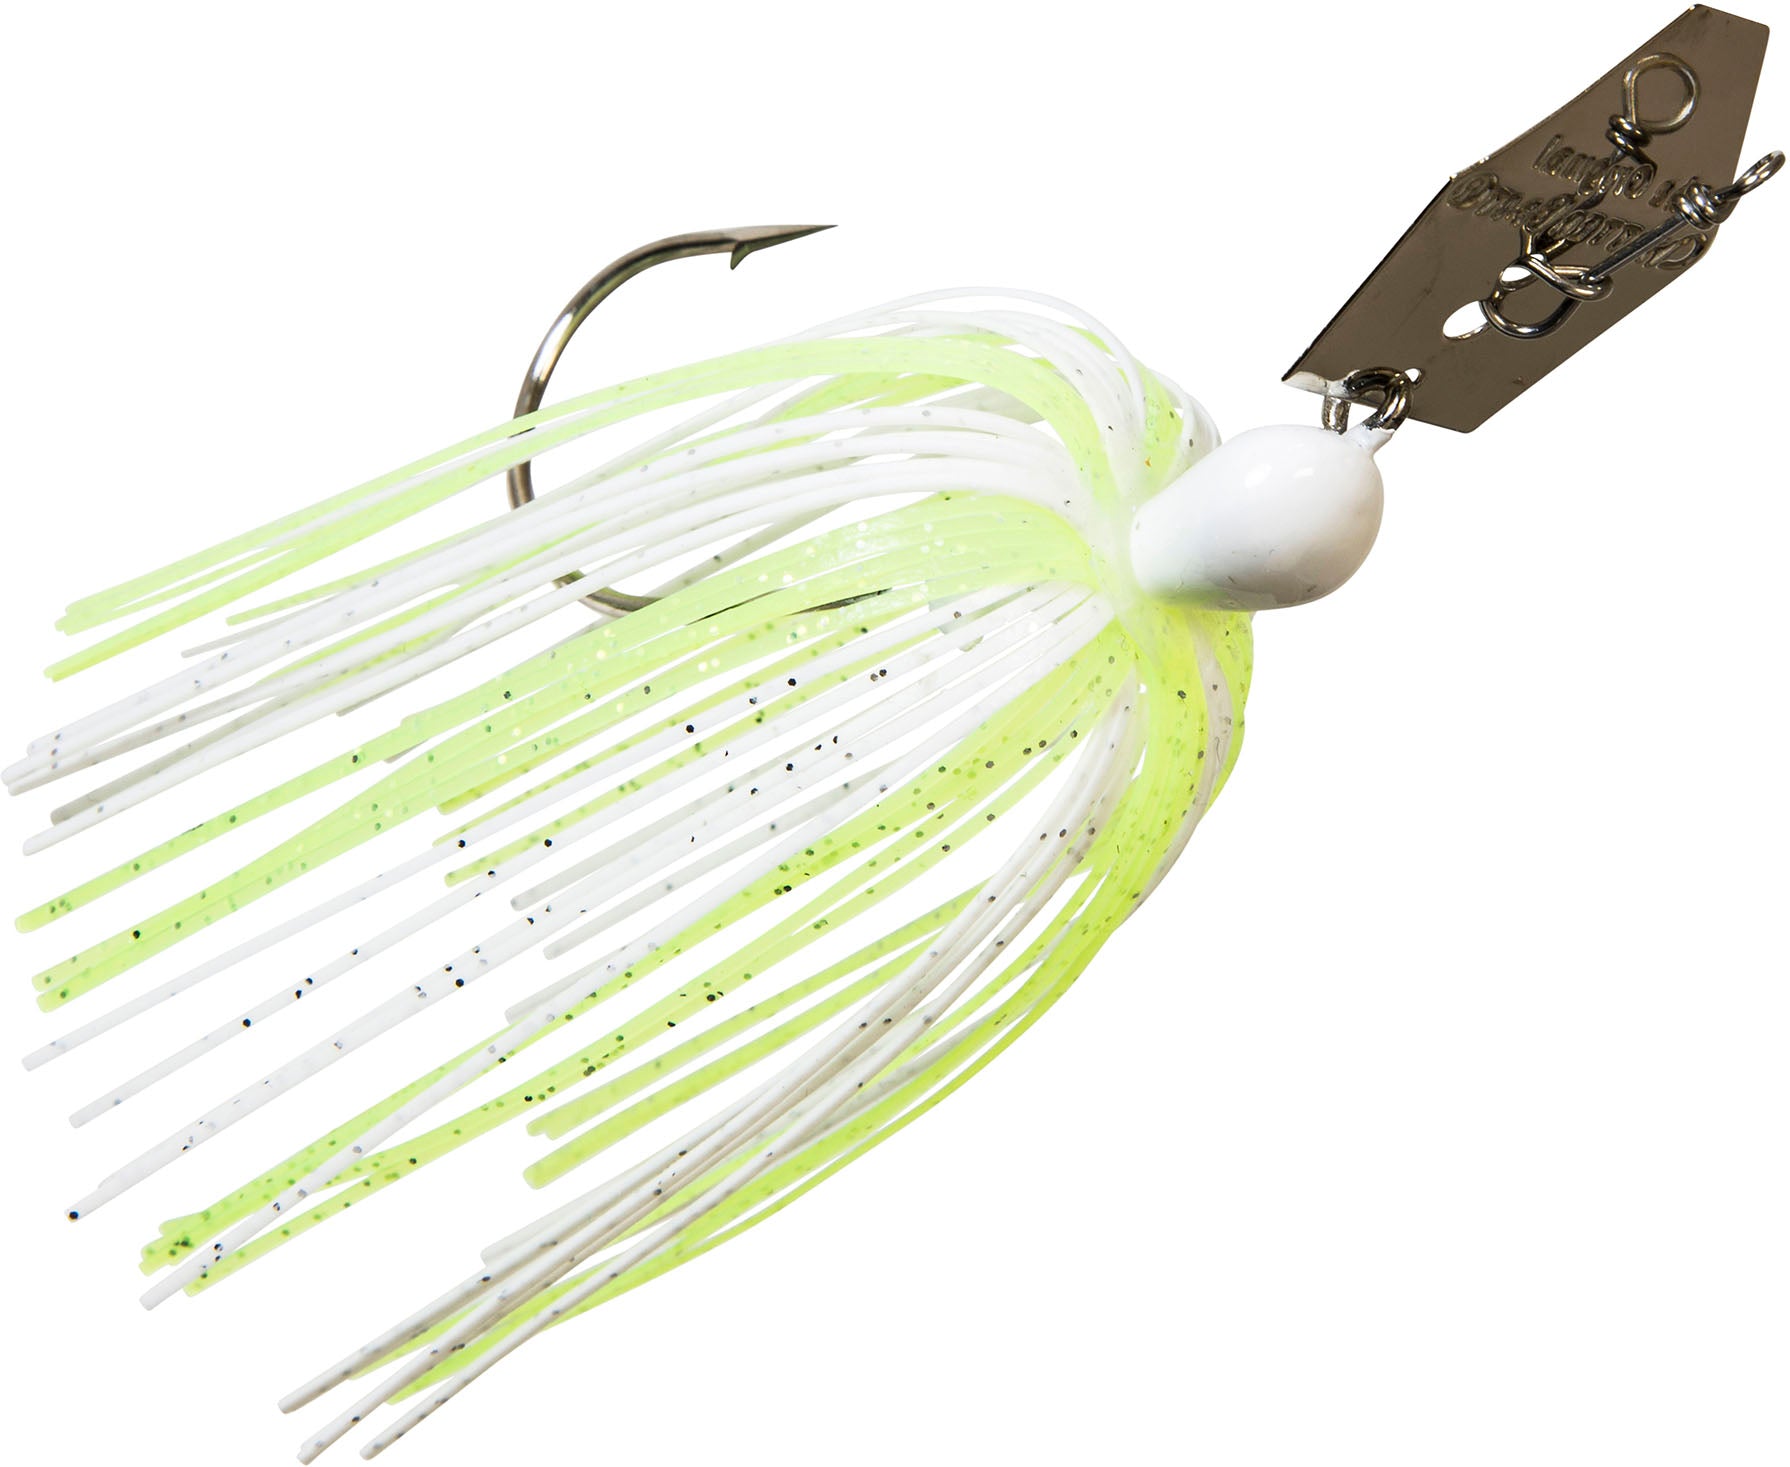 Z Man Original Chatterbait - Chartreuse Sexy Shad 3/8 oz